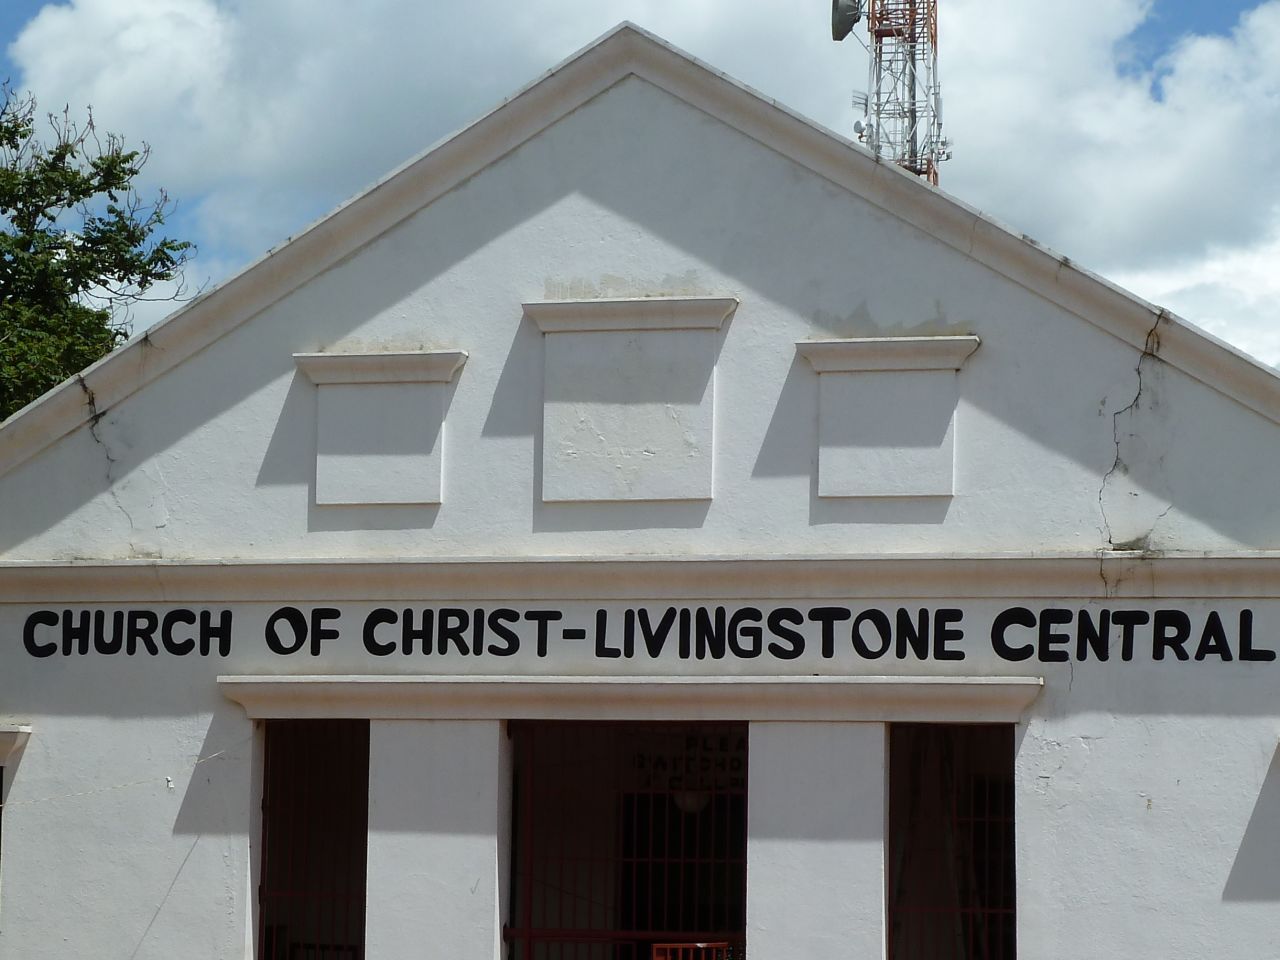 This church in the Zambian town of Livingstone was once a synagogue. The faint imprint of the Star of David can be seen in the facade over the main entrance.